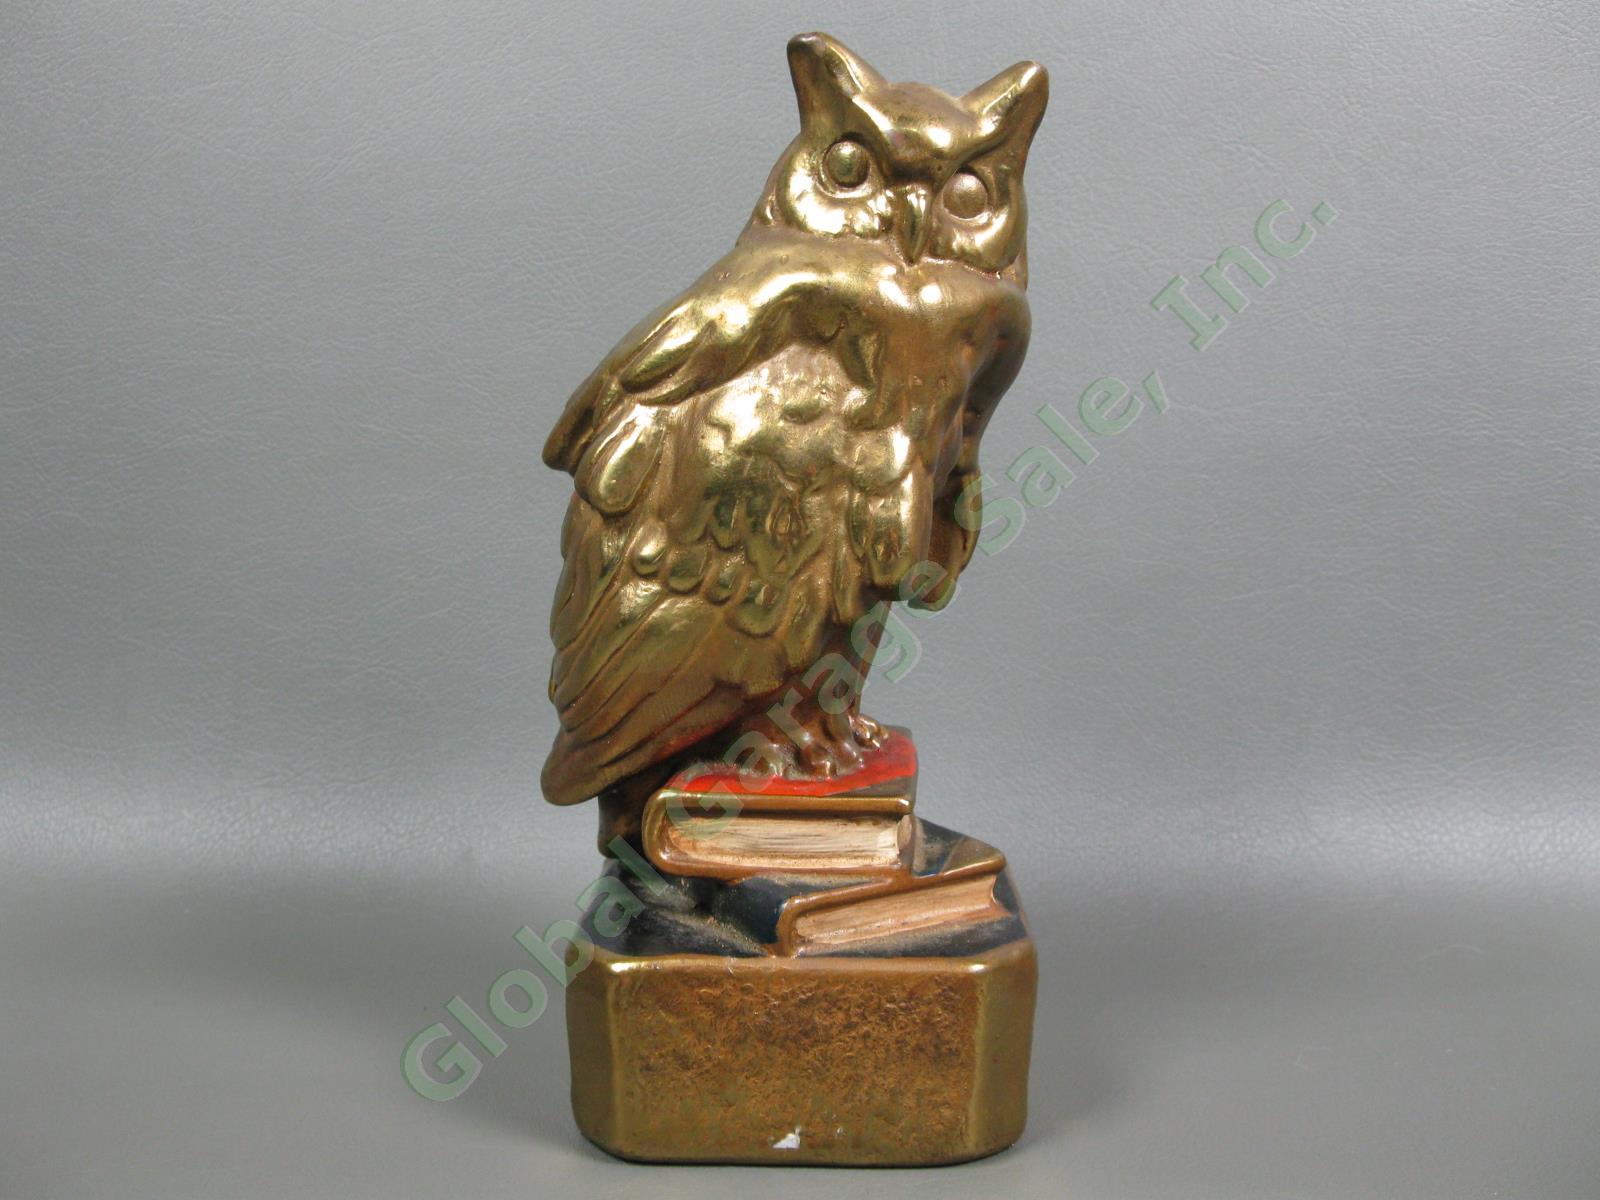 Original Antique 1930s Marion Bronze Owl Paperweight Statue Bookend Gold Painted